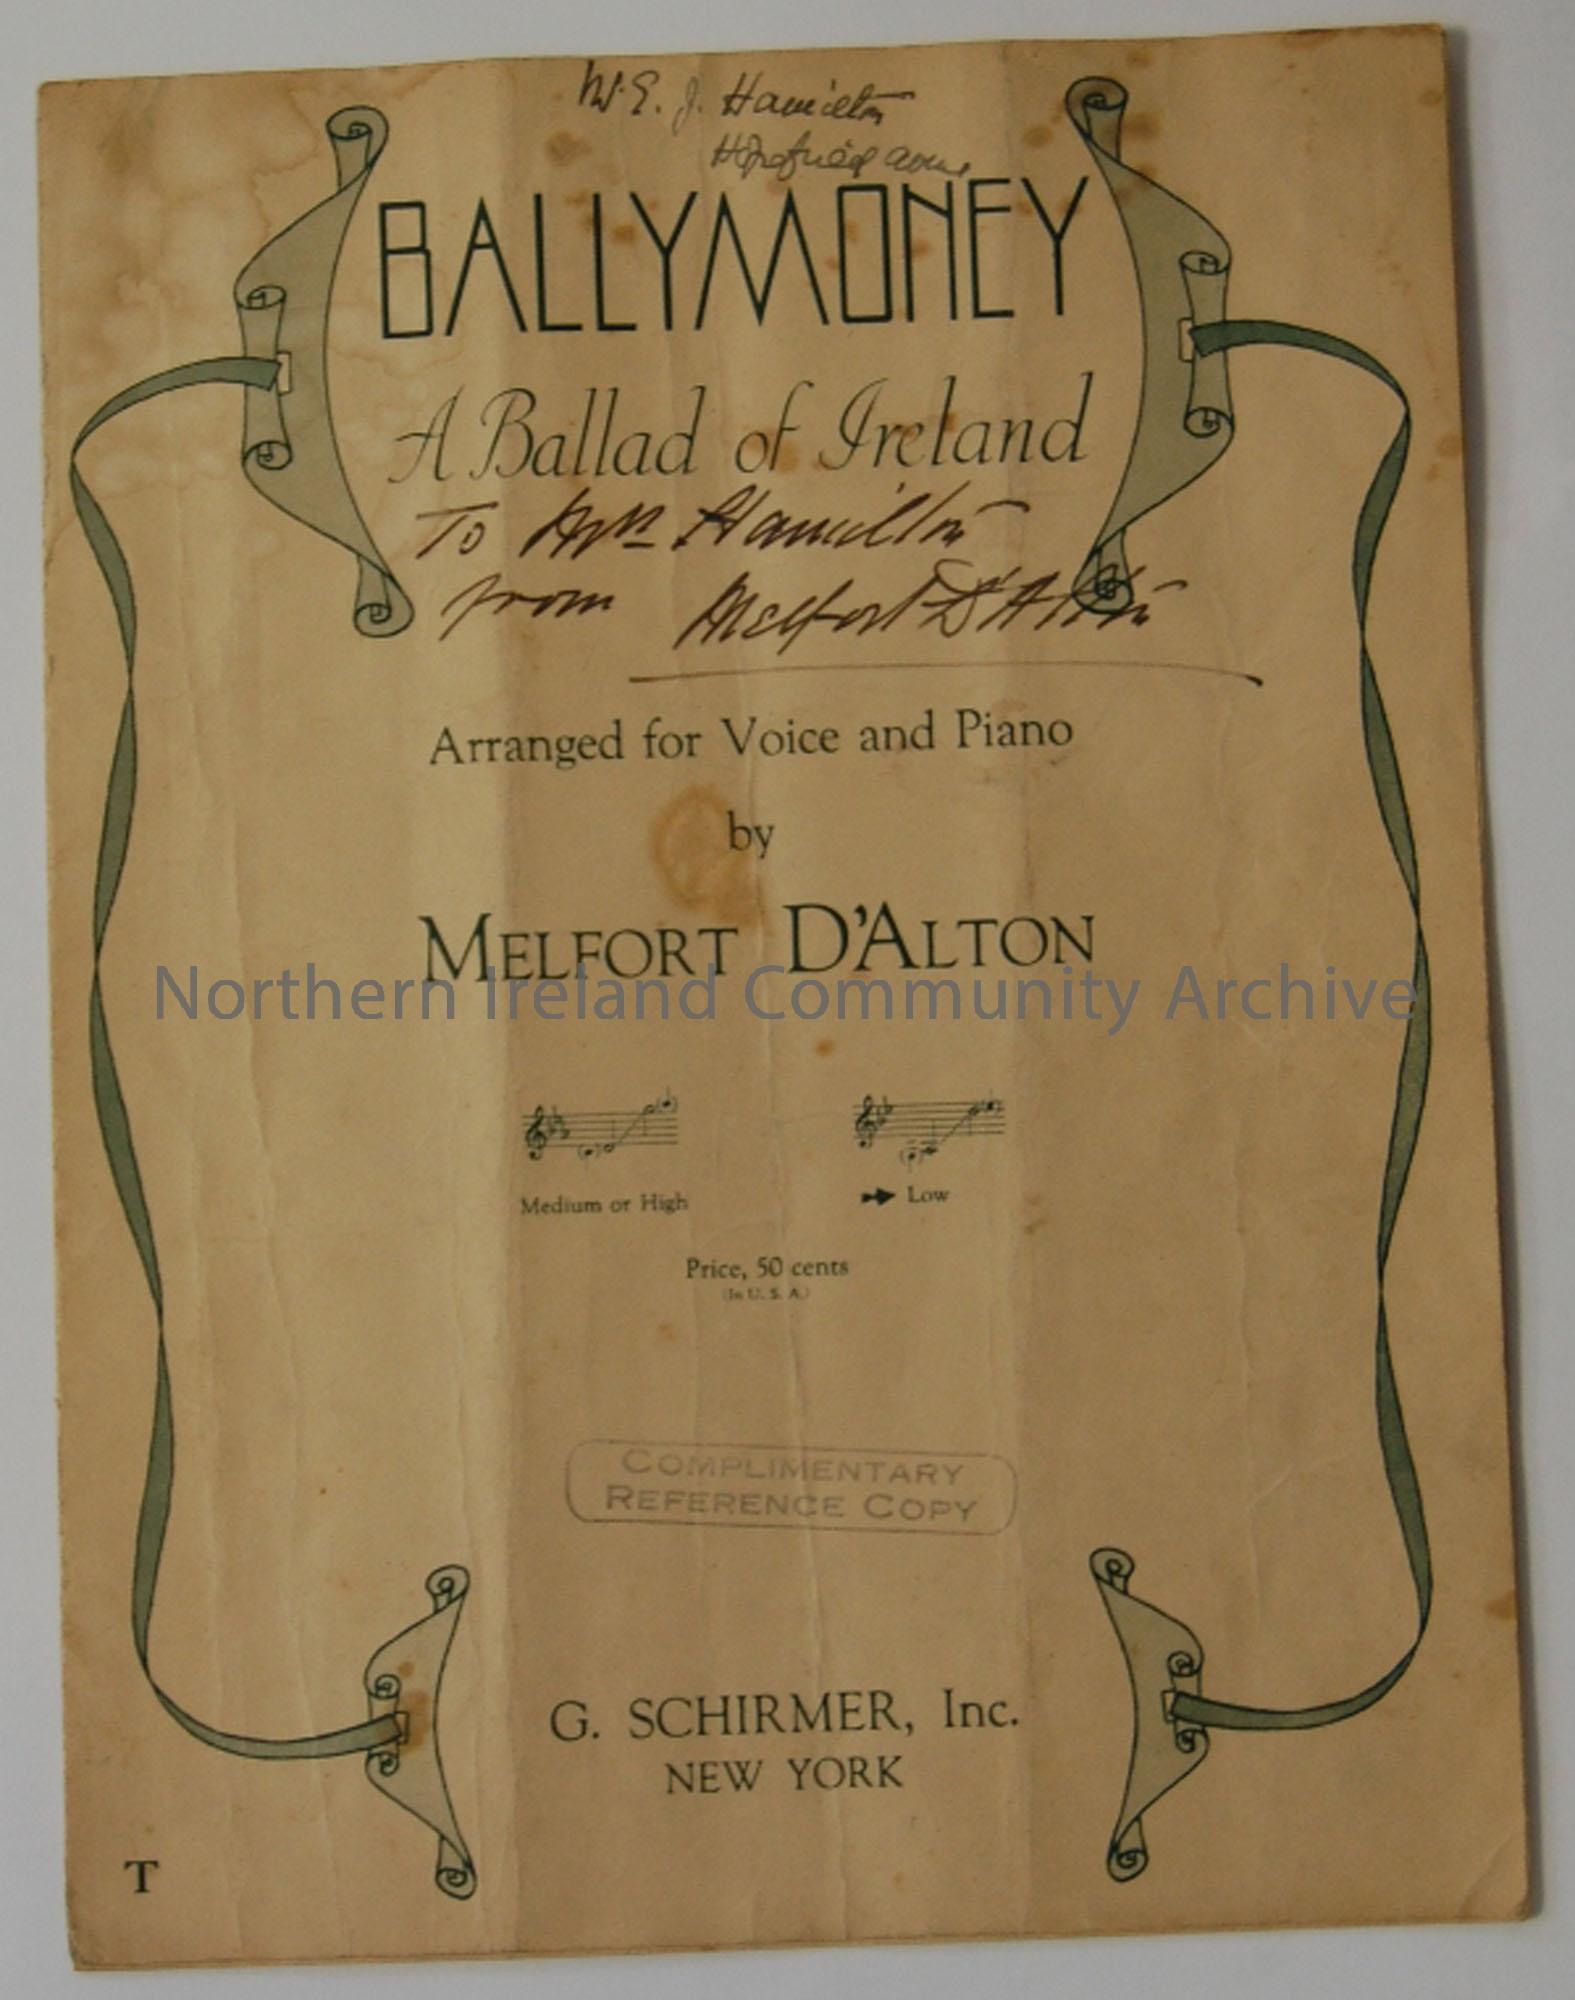 Sheet music for ‘Ballymoney: A Ballad of Ireland’ Arranged for voice & piano by Melfort D’Alton, price 50 cents.